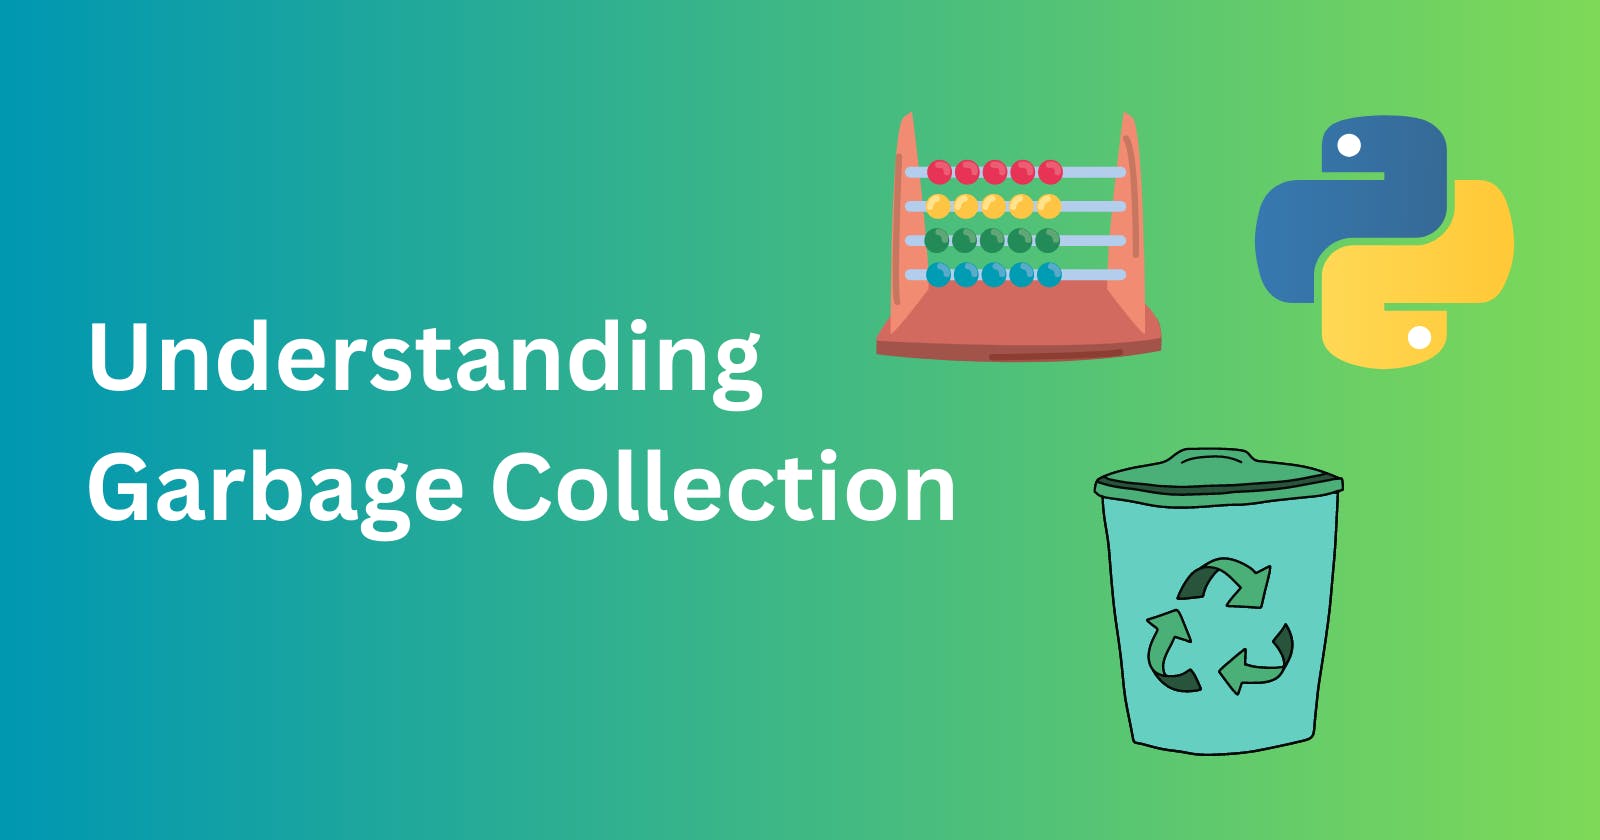 Understanding Garbage Collection and Object References